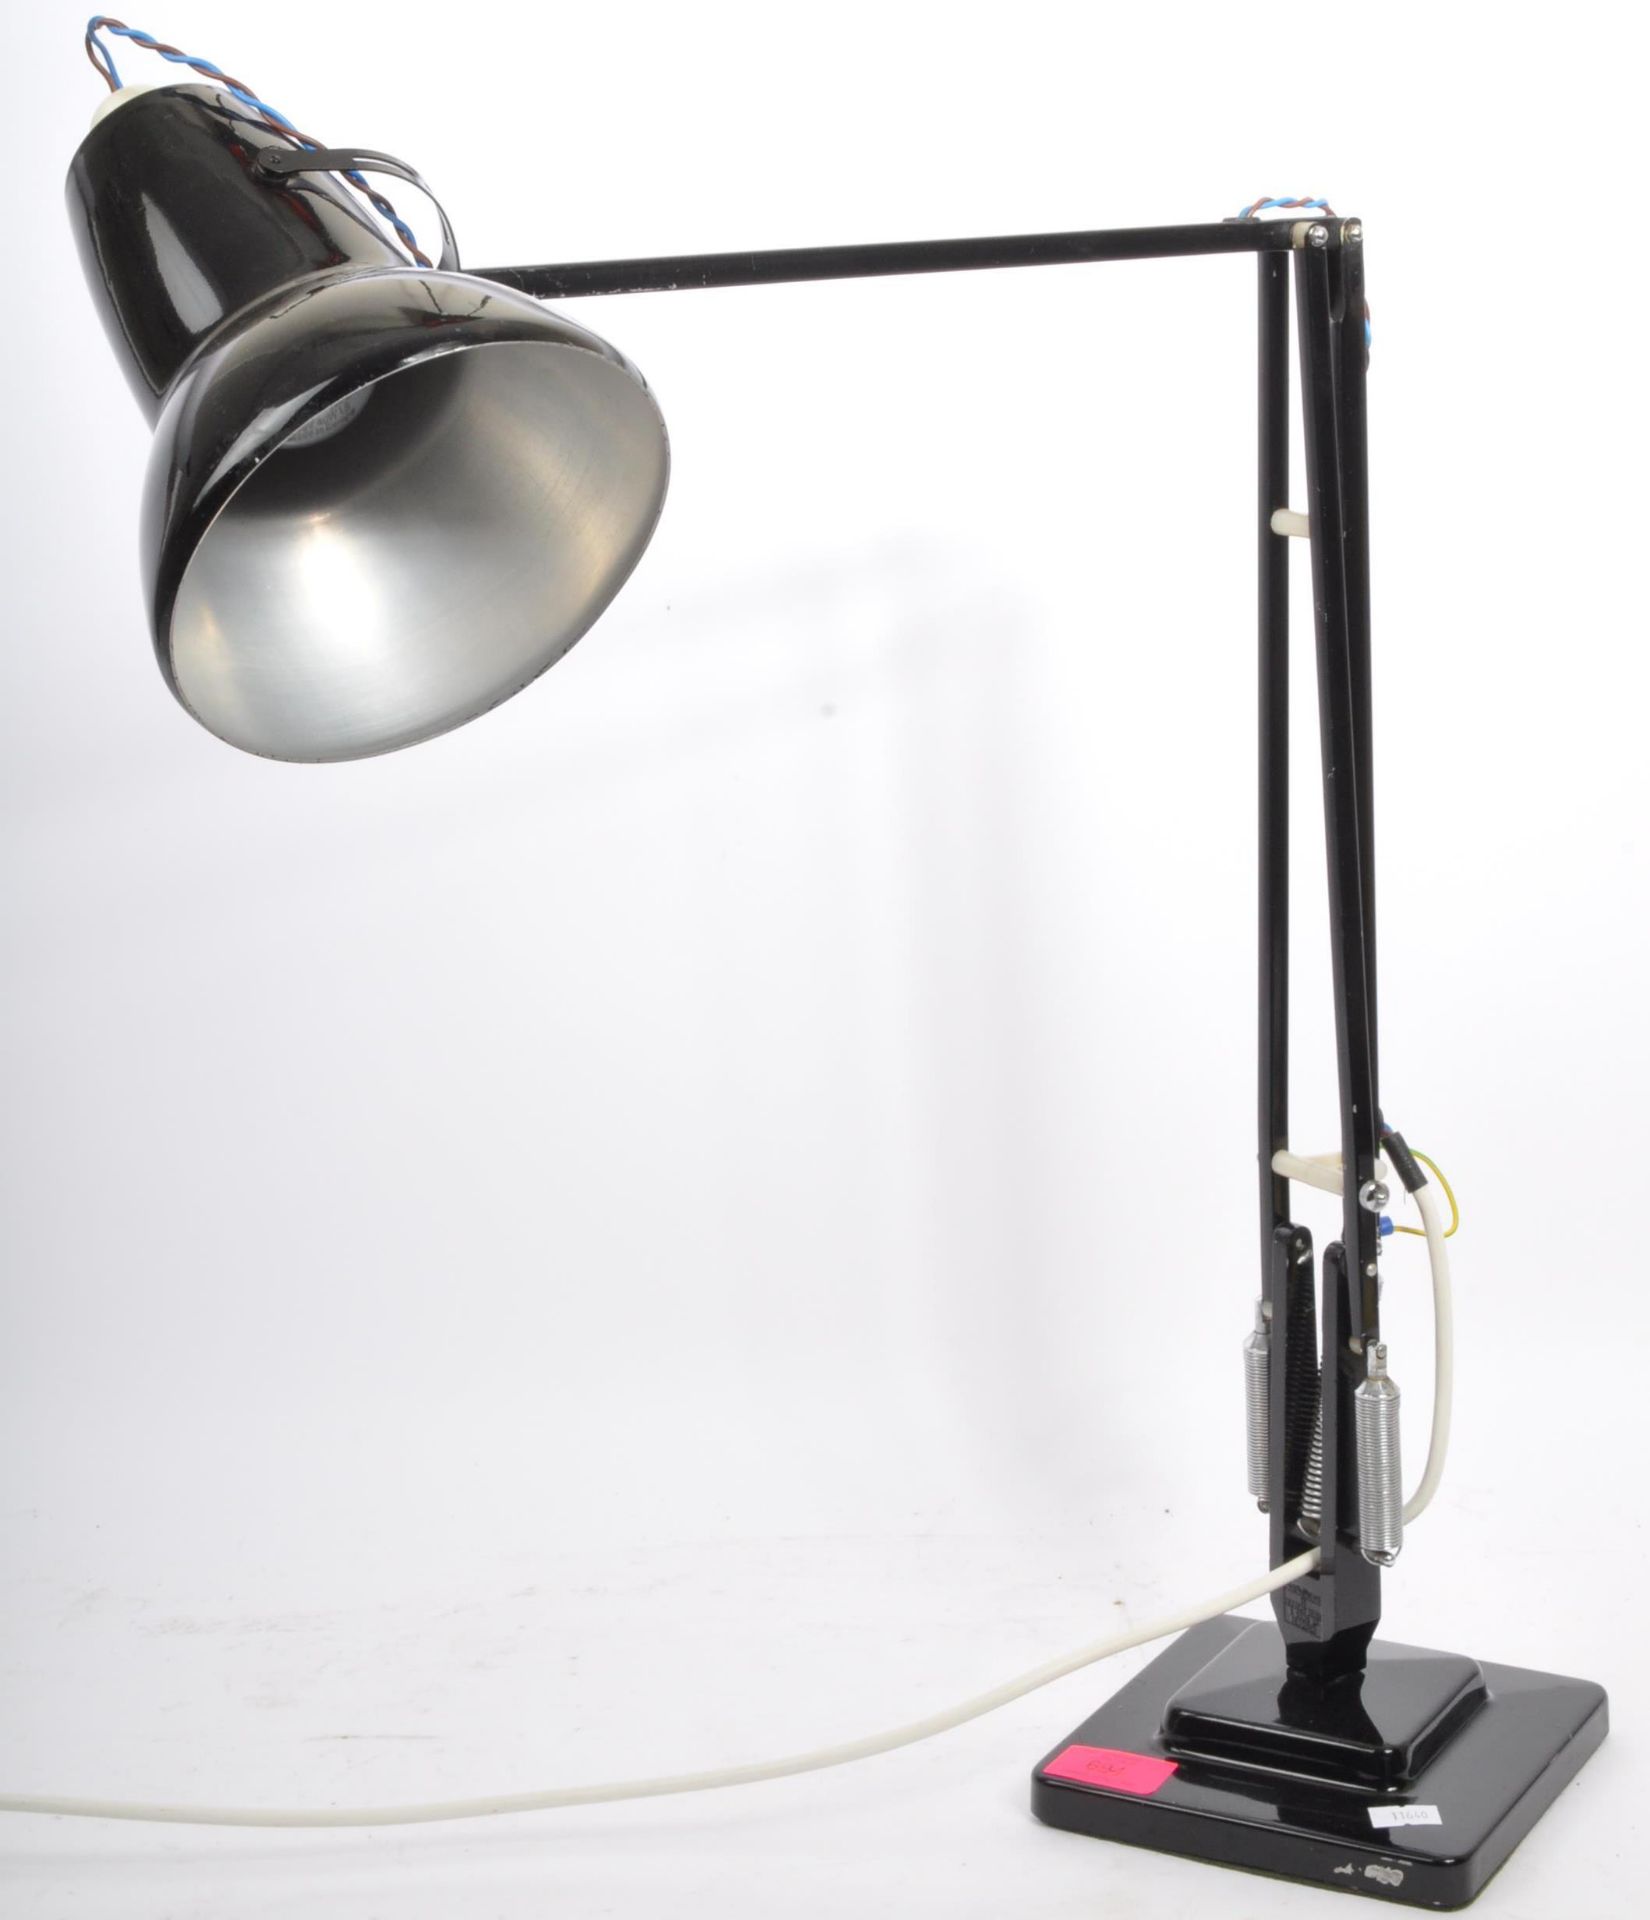 A VINTAGE MID 20TH CENTURY HERBERT TERRY ANGLEPOISE LAMP